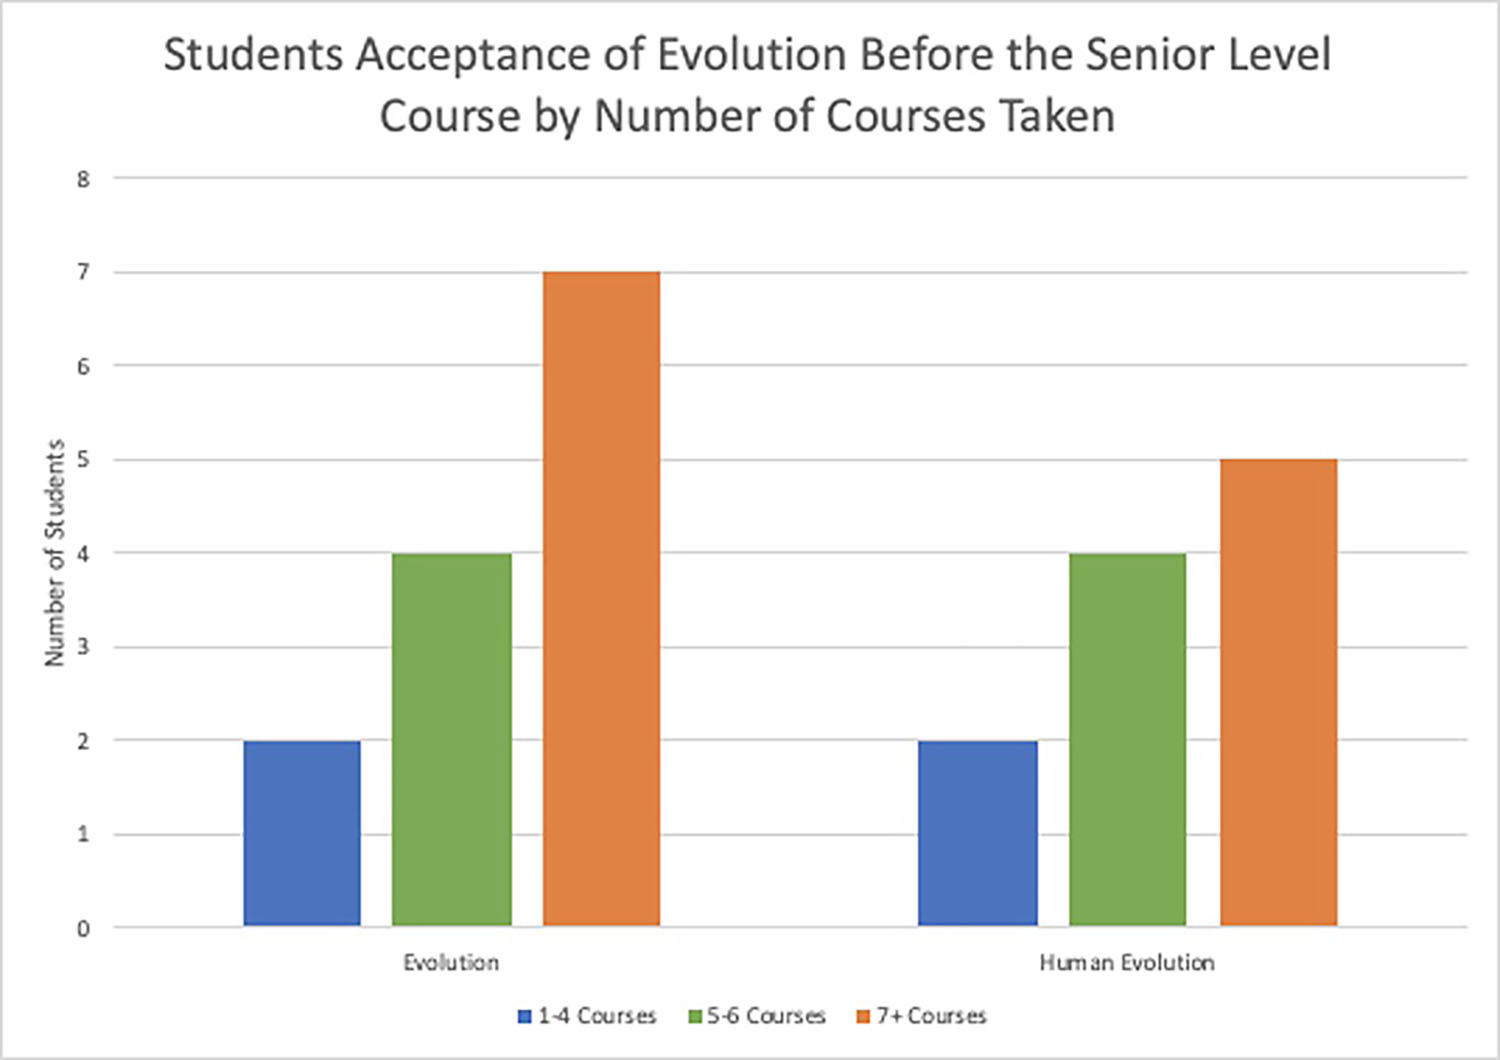 Student participants’ acceptance of evolution in general and human evolution related to the number of courses that included evolutionary themes taken before the senior level course.